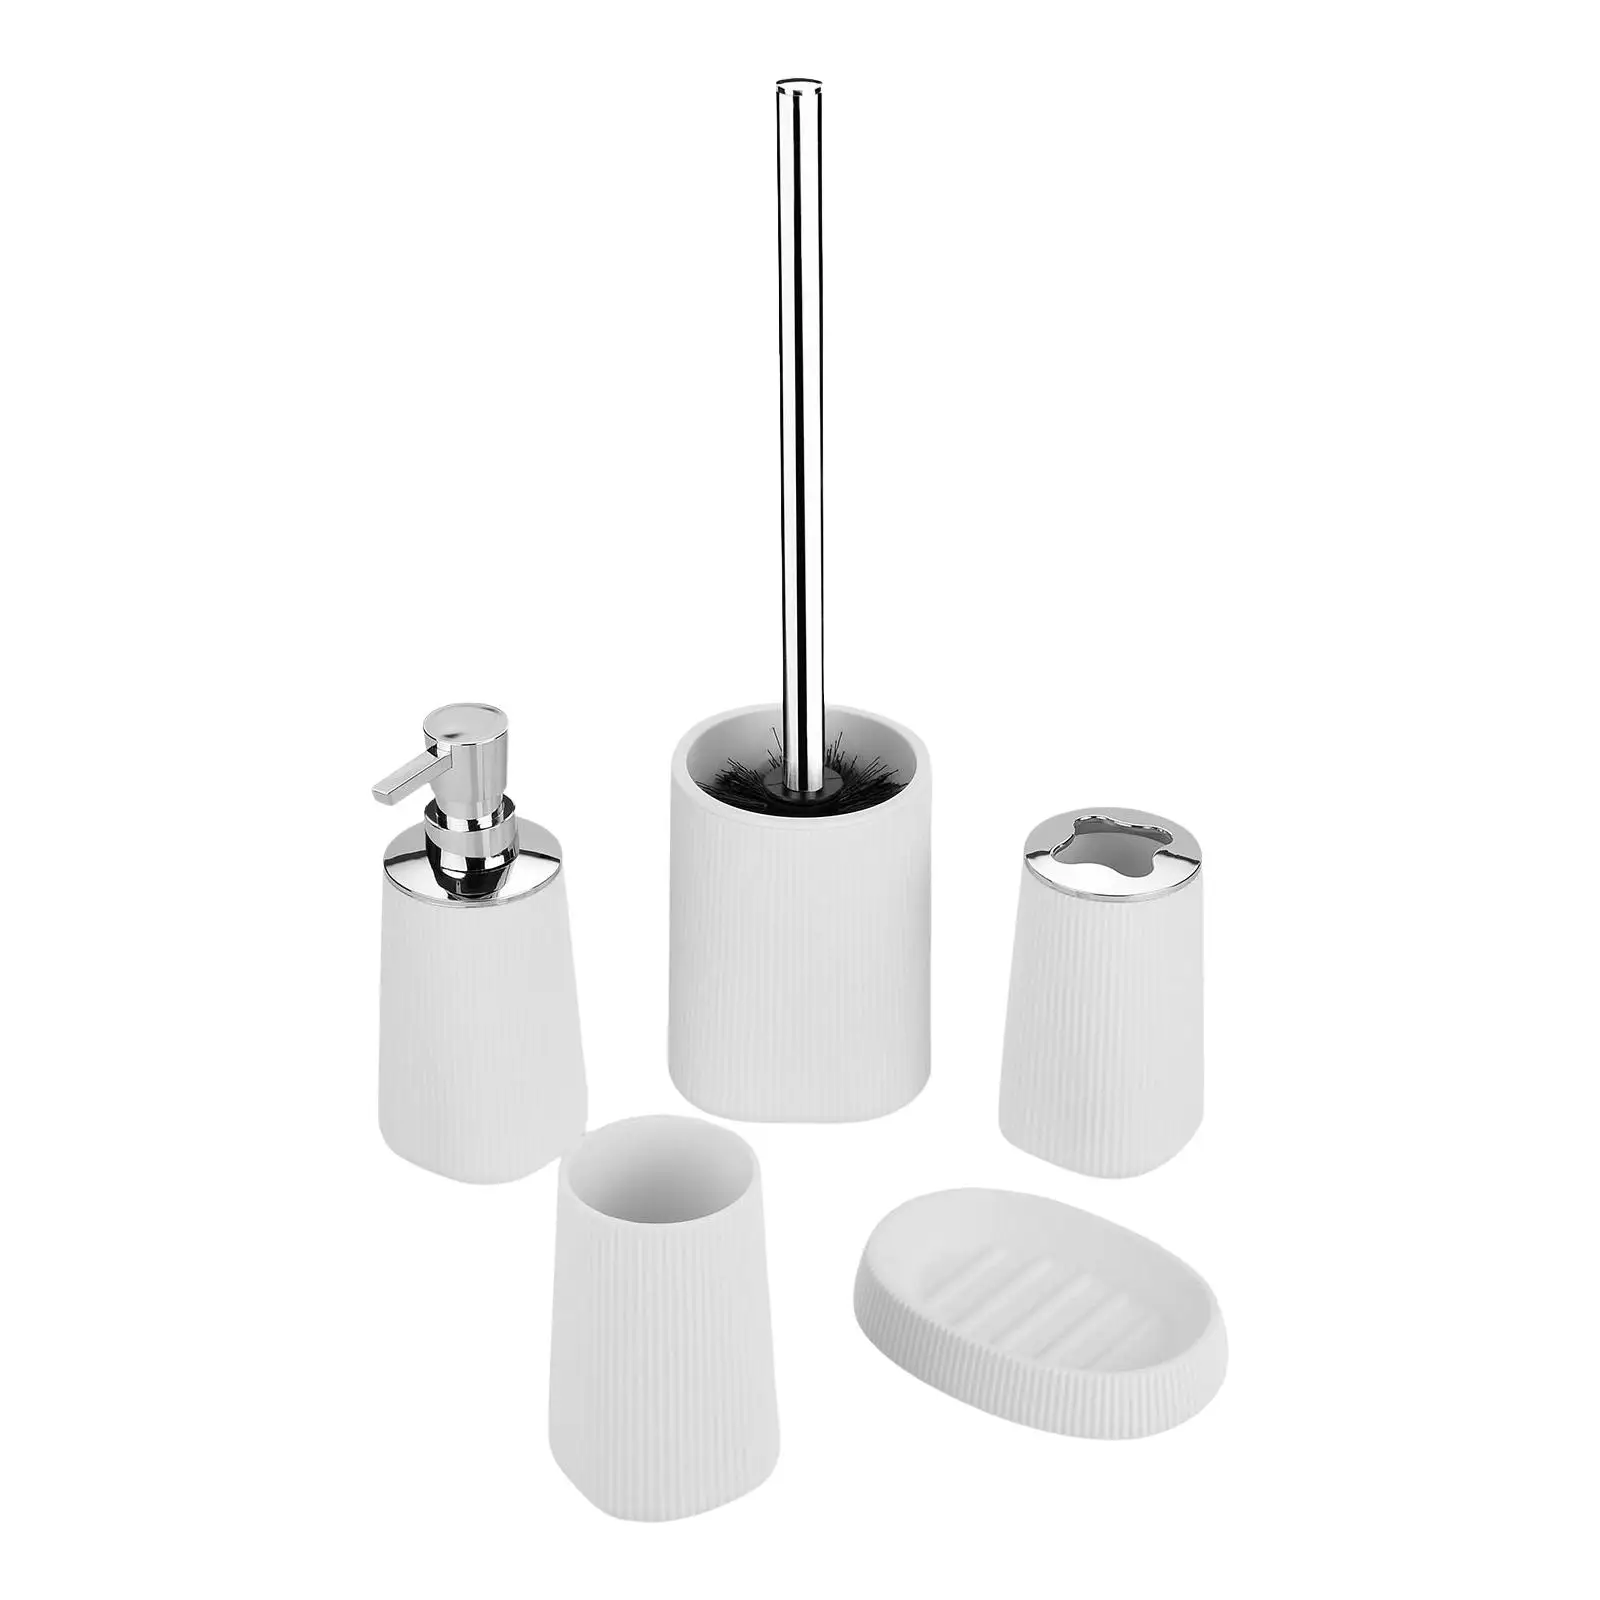 5Pcs Bathroom Sets Toothbrush Holder Cup Soap Dish for Dormitory Home Office